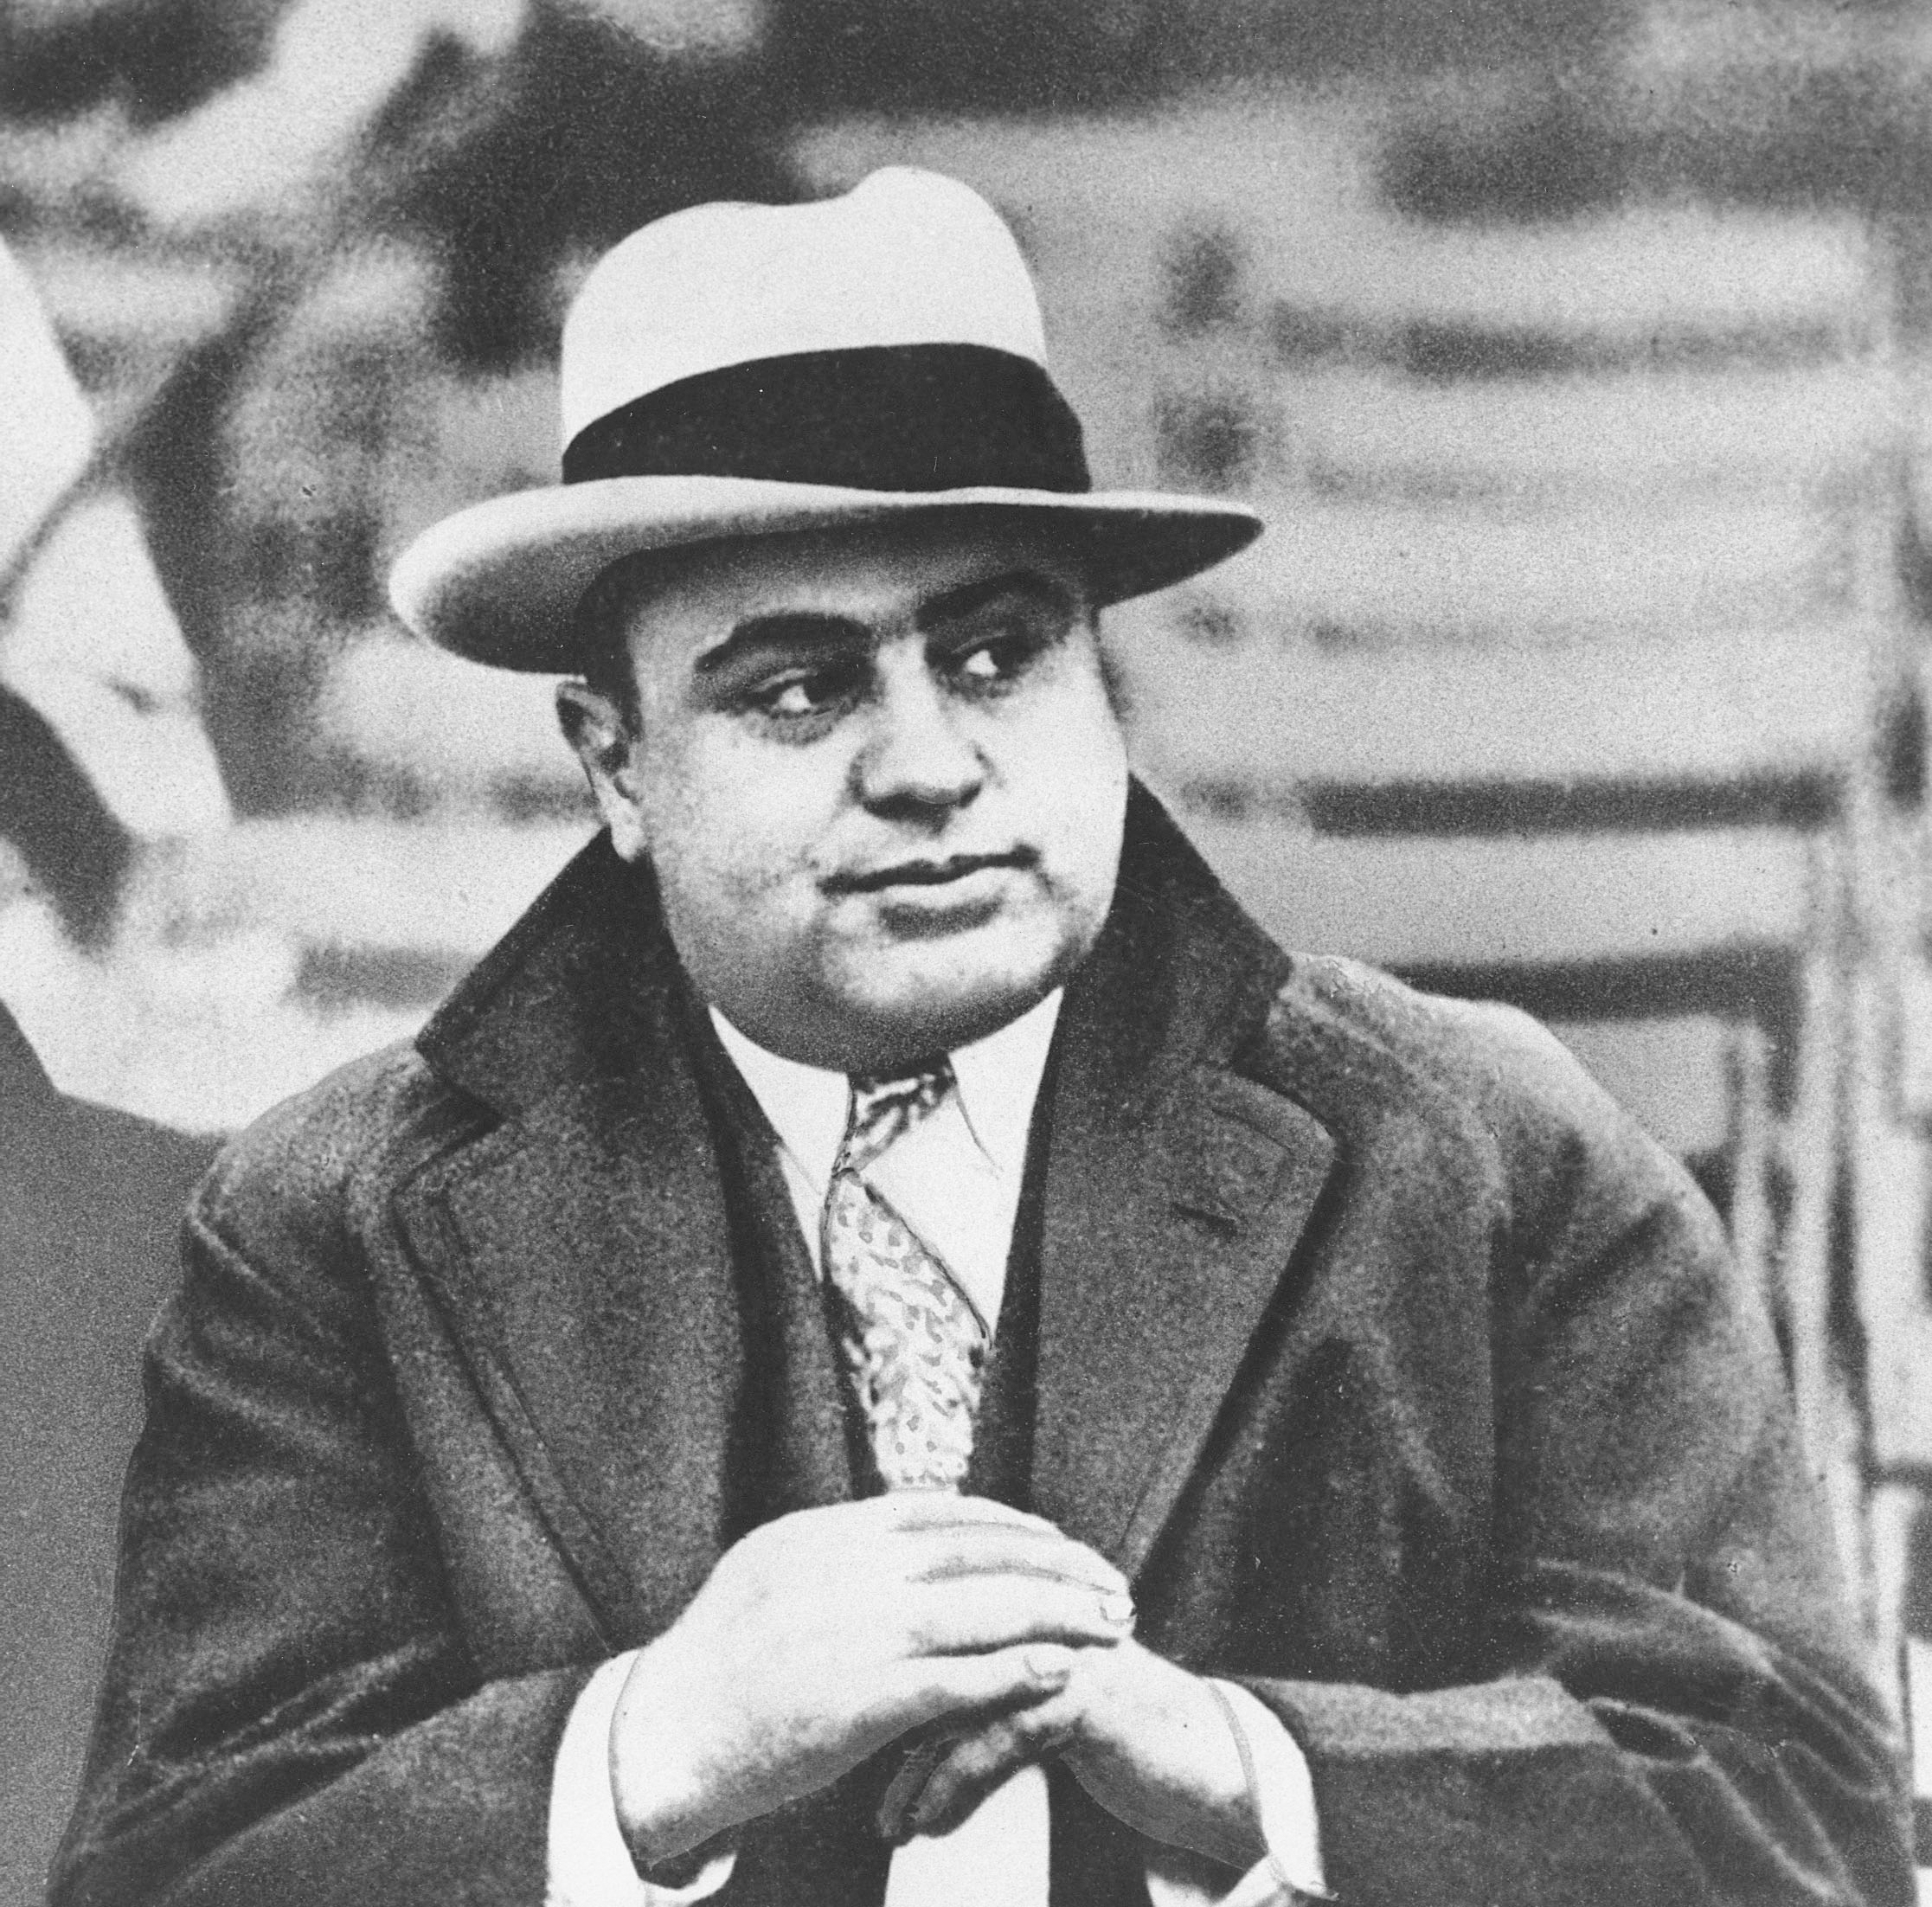 PHOTO: Chicago mobster Al Capone is seen at a football game in Chicago in this Jan. 19, 1931 file photograph.